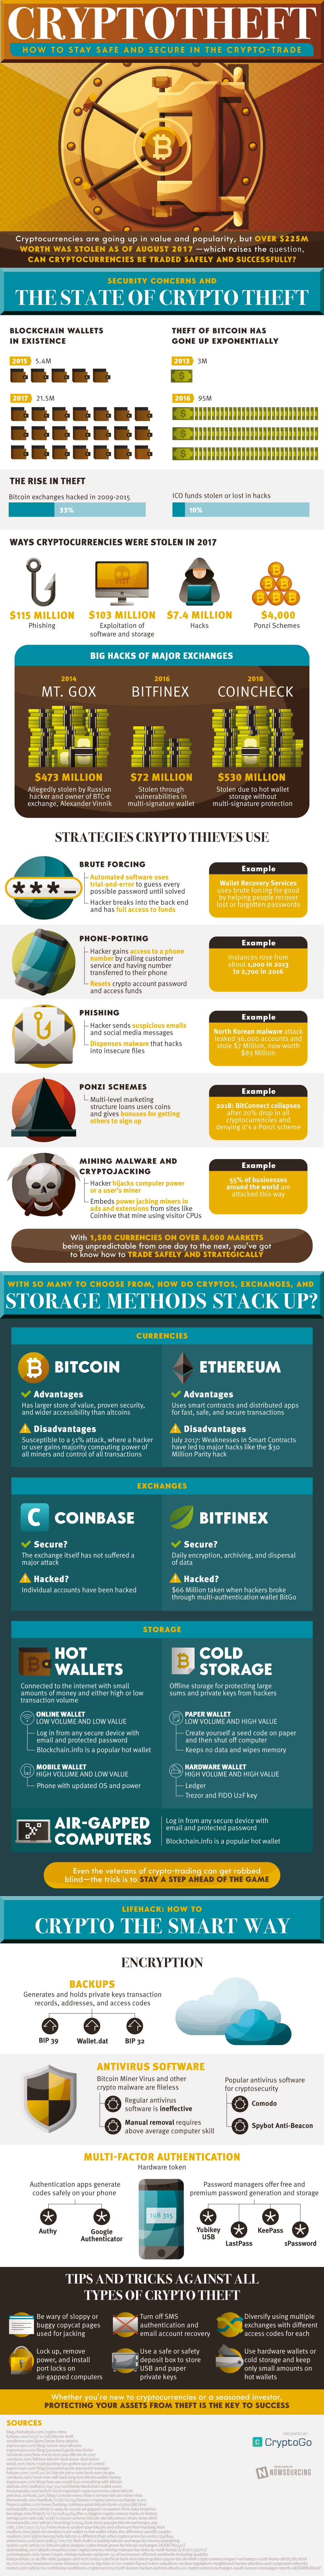 crypto-security-infographic.png